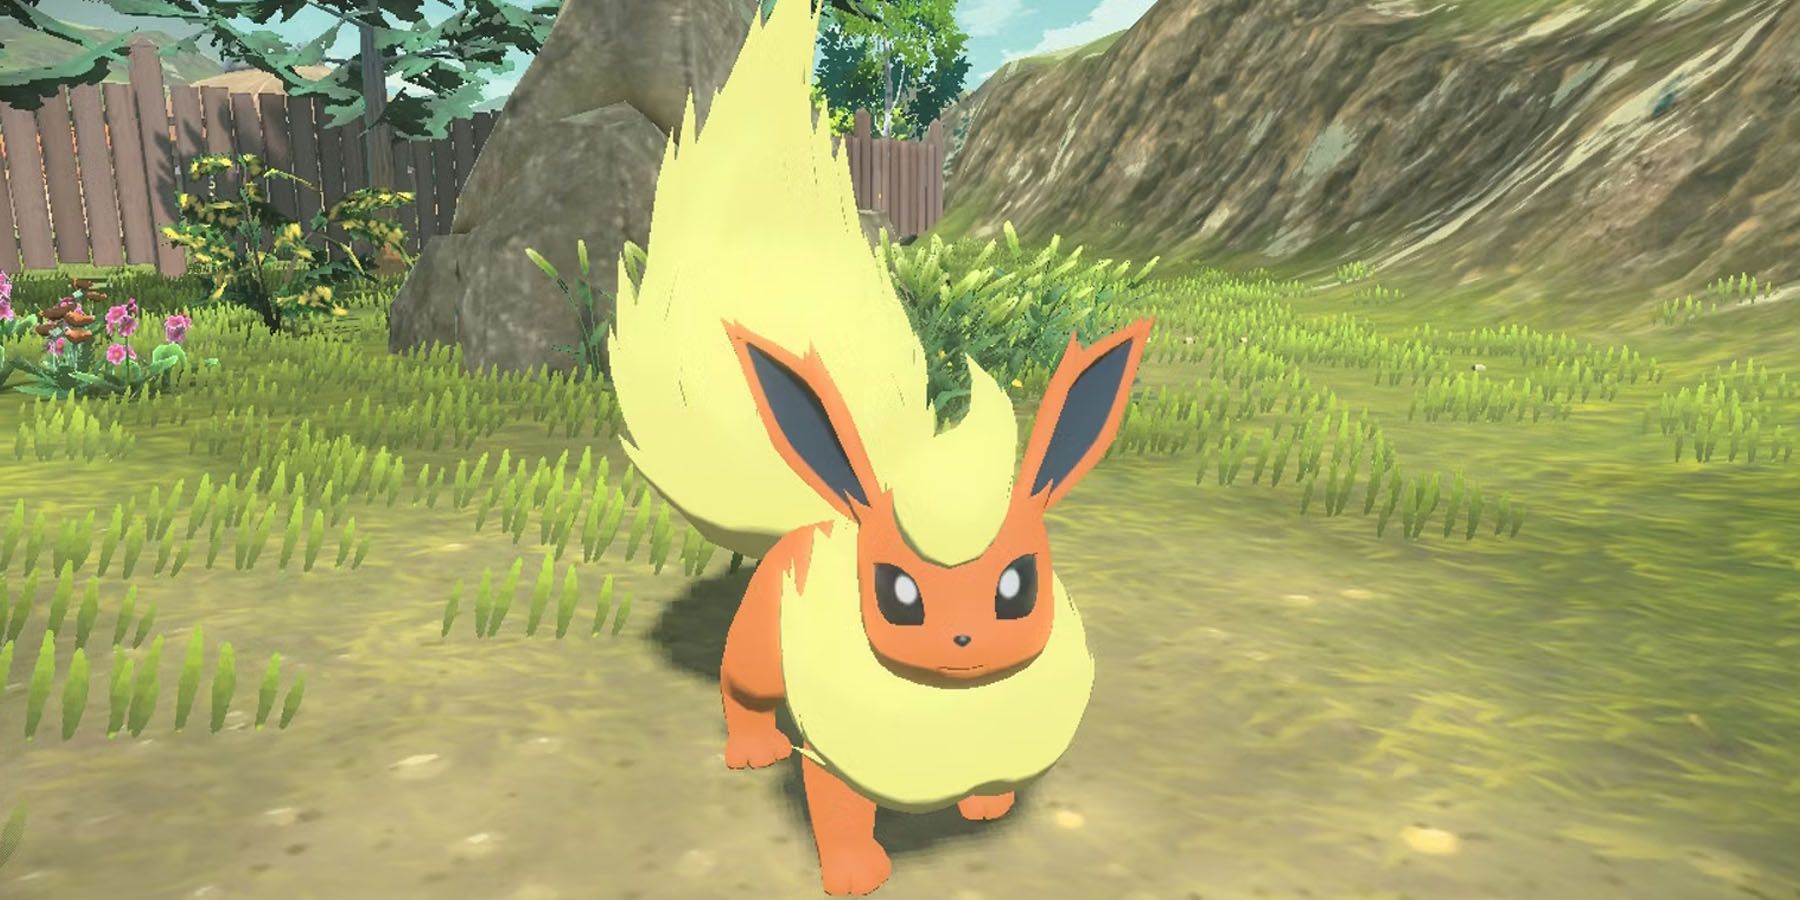 Flareon stylized looking at camera in field